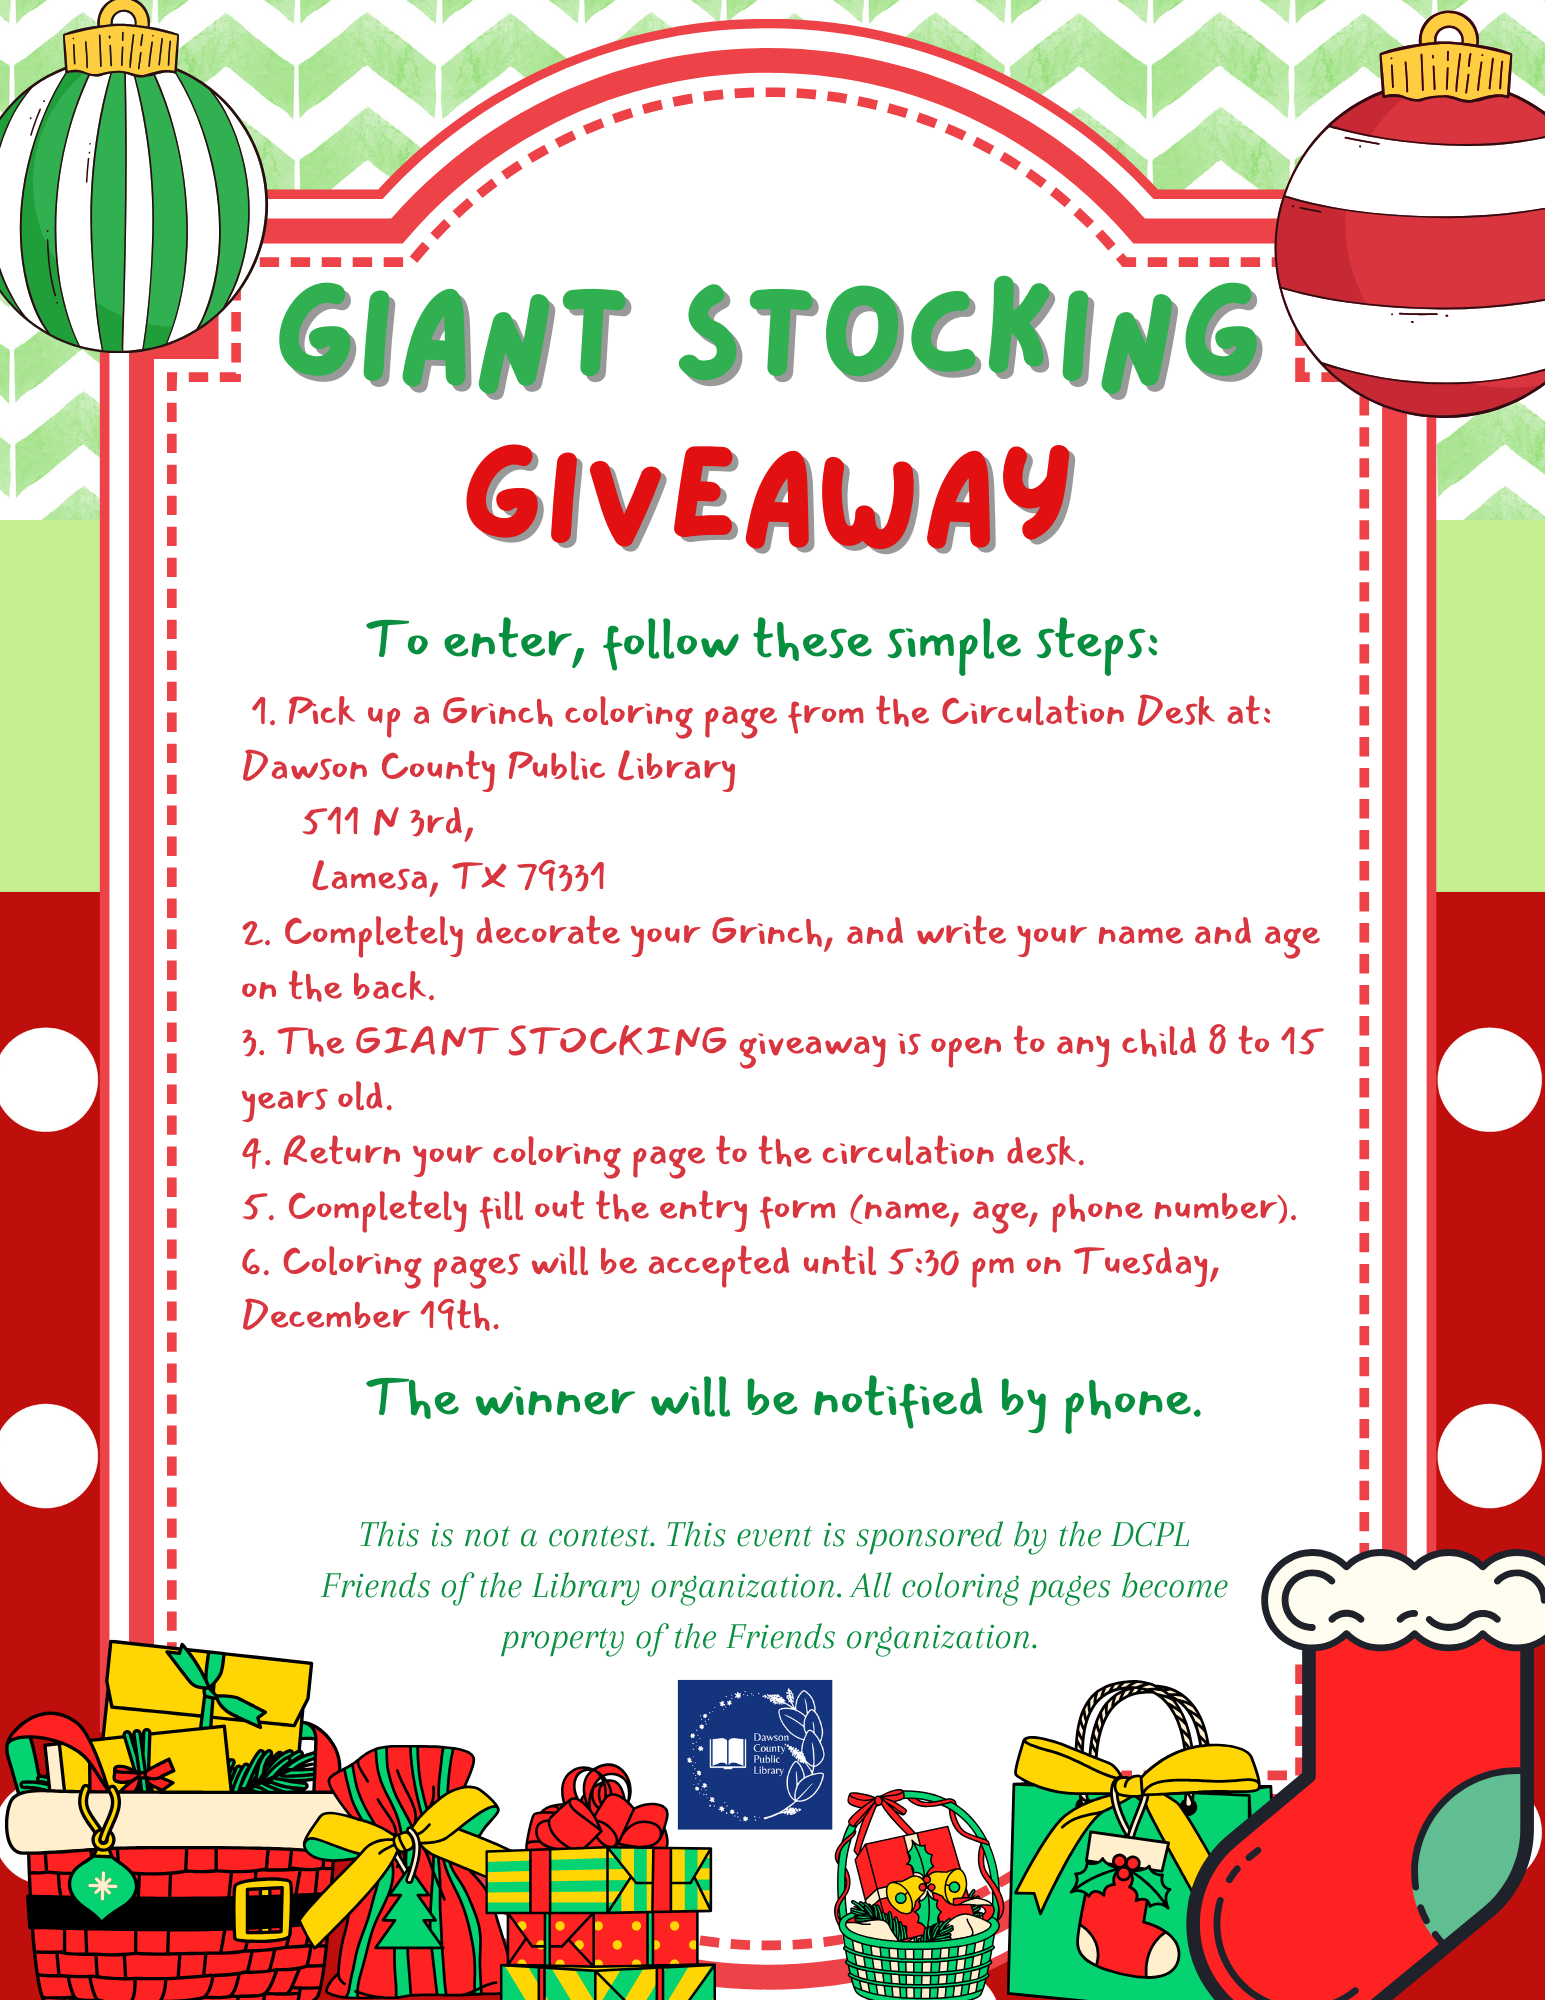 Giant stocking giveaway (2).png